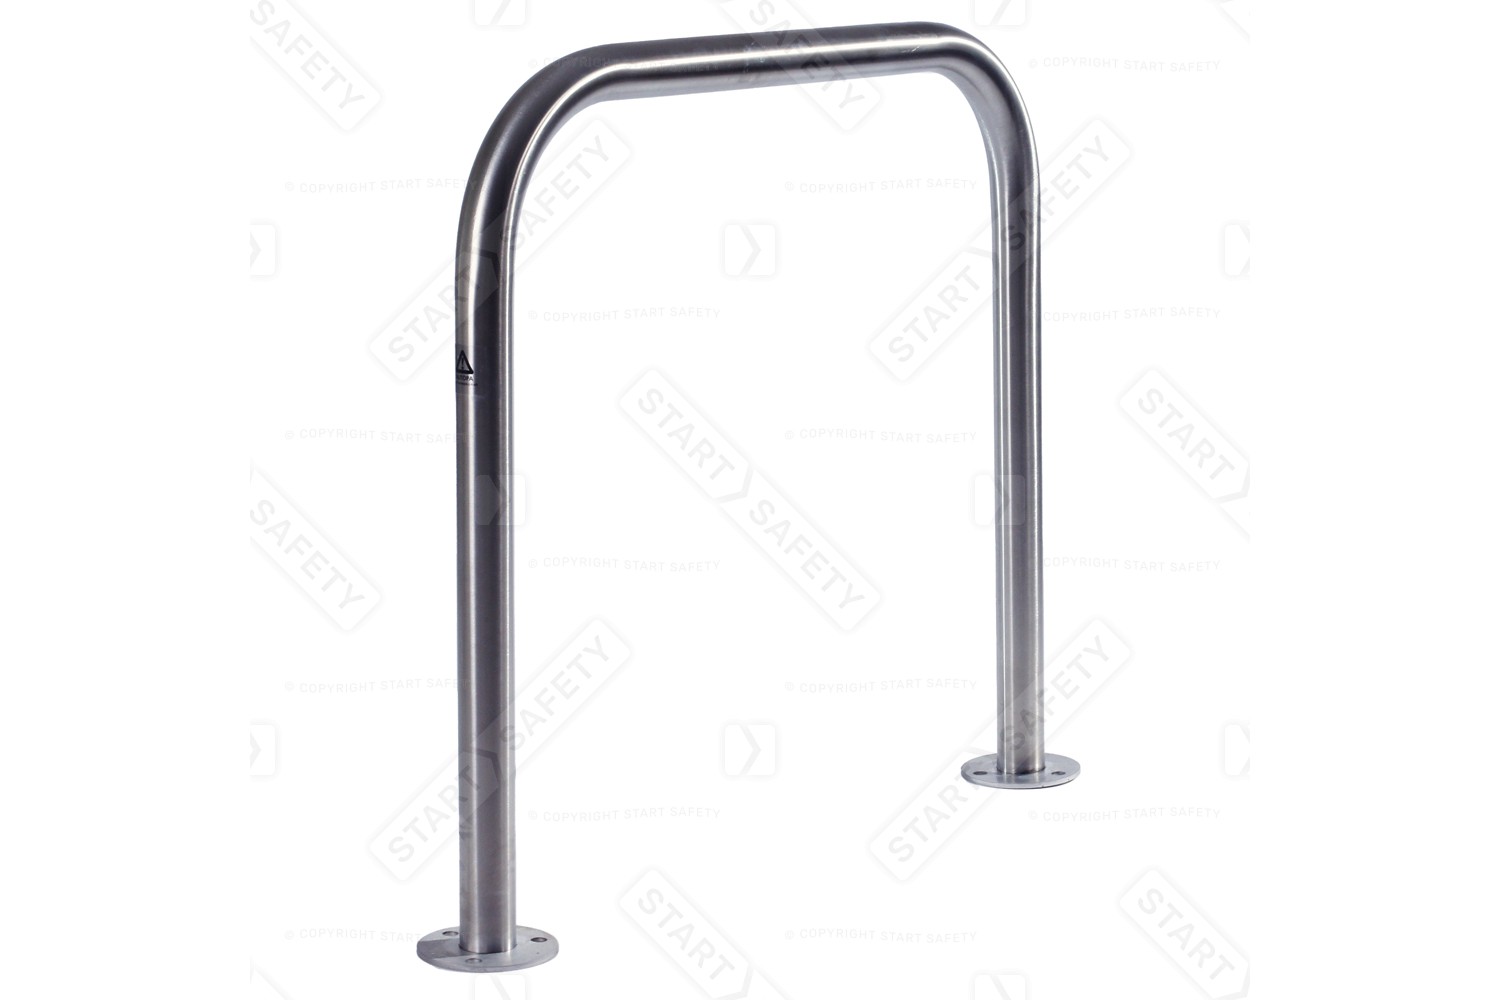 Sheffield cycle stand stainless steel 304 grade